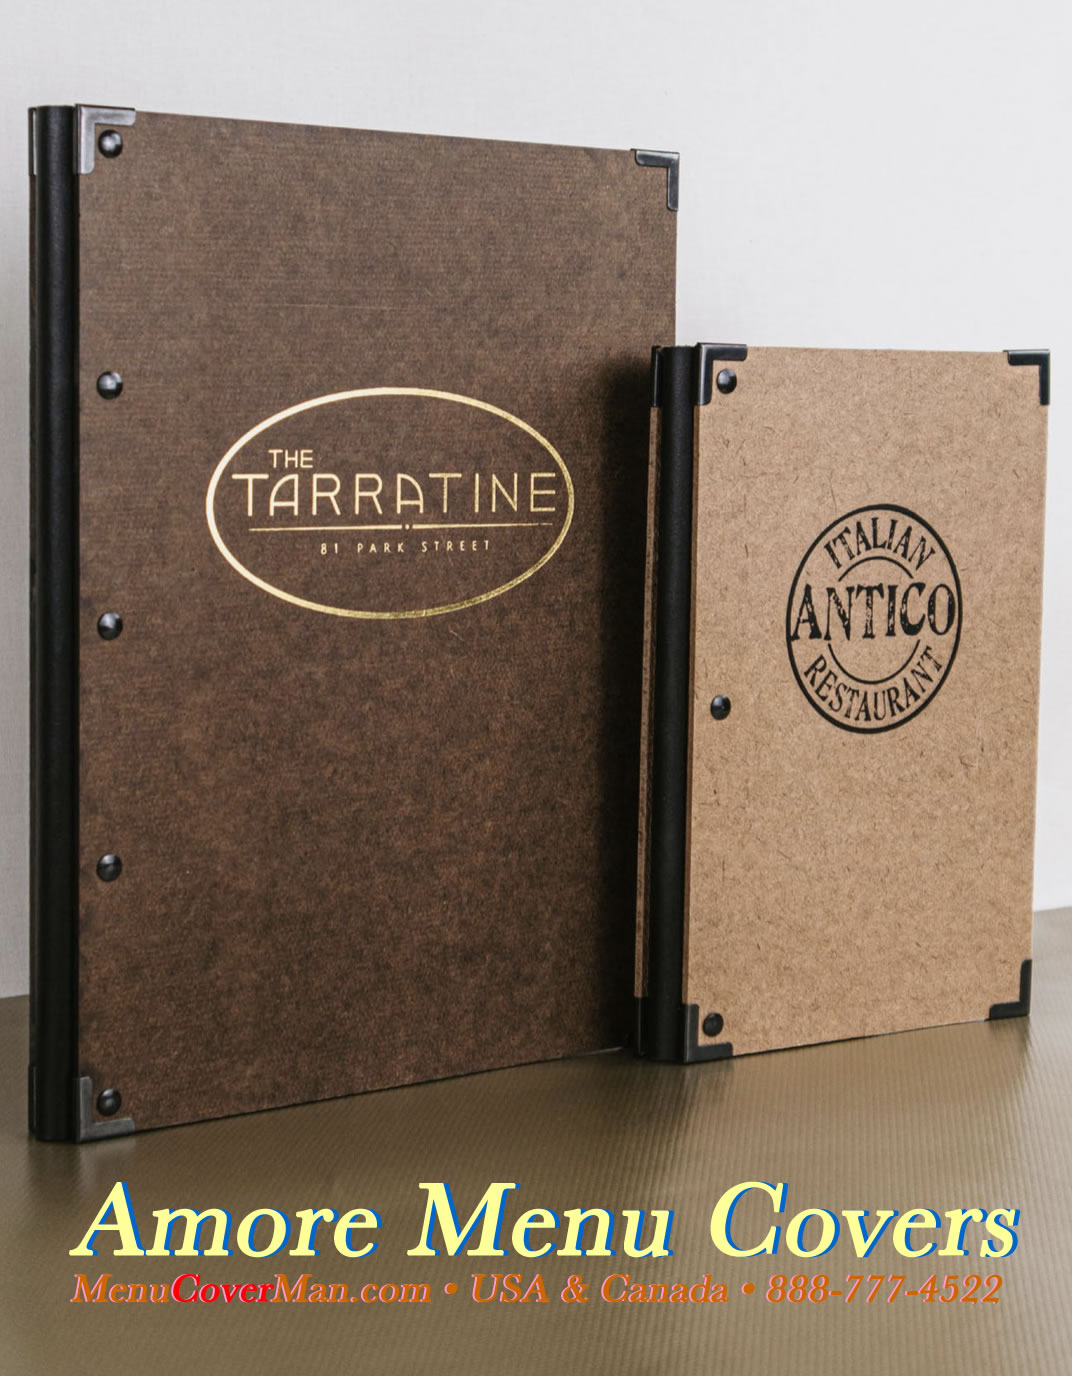 Amore Menu Jackets - A very cool addition to your restaurant!